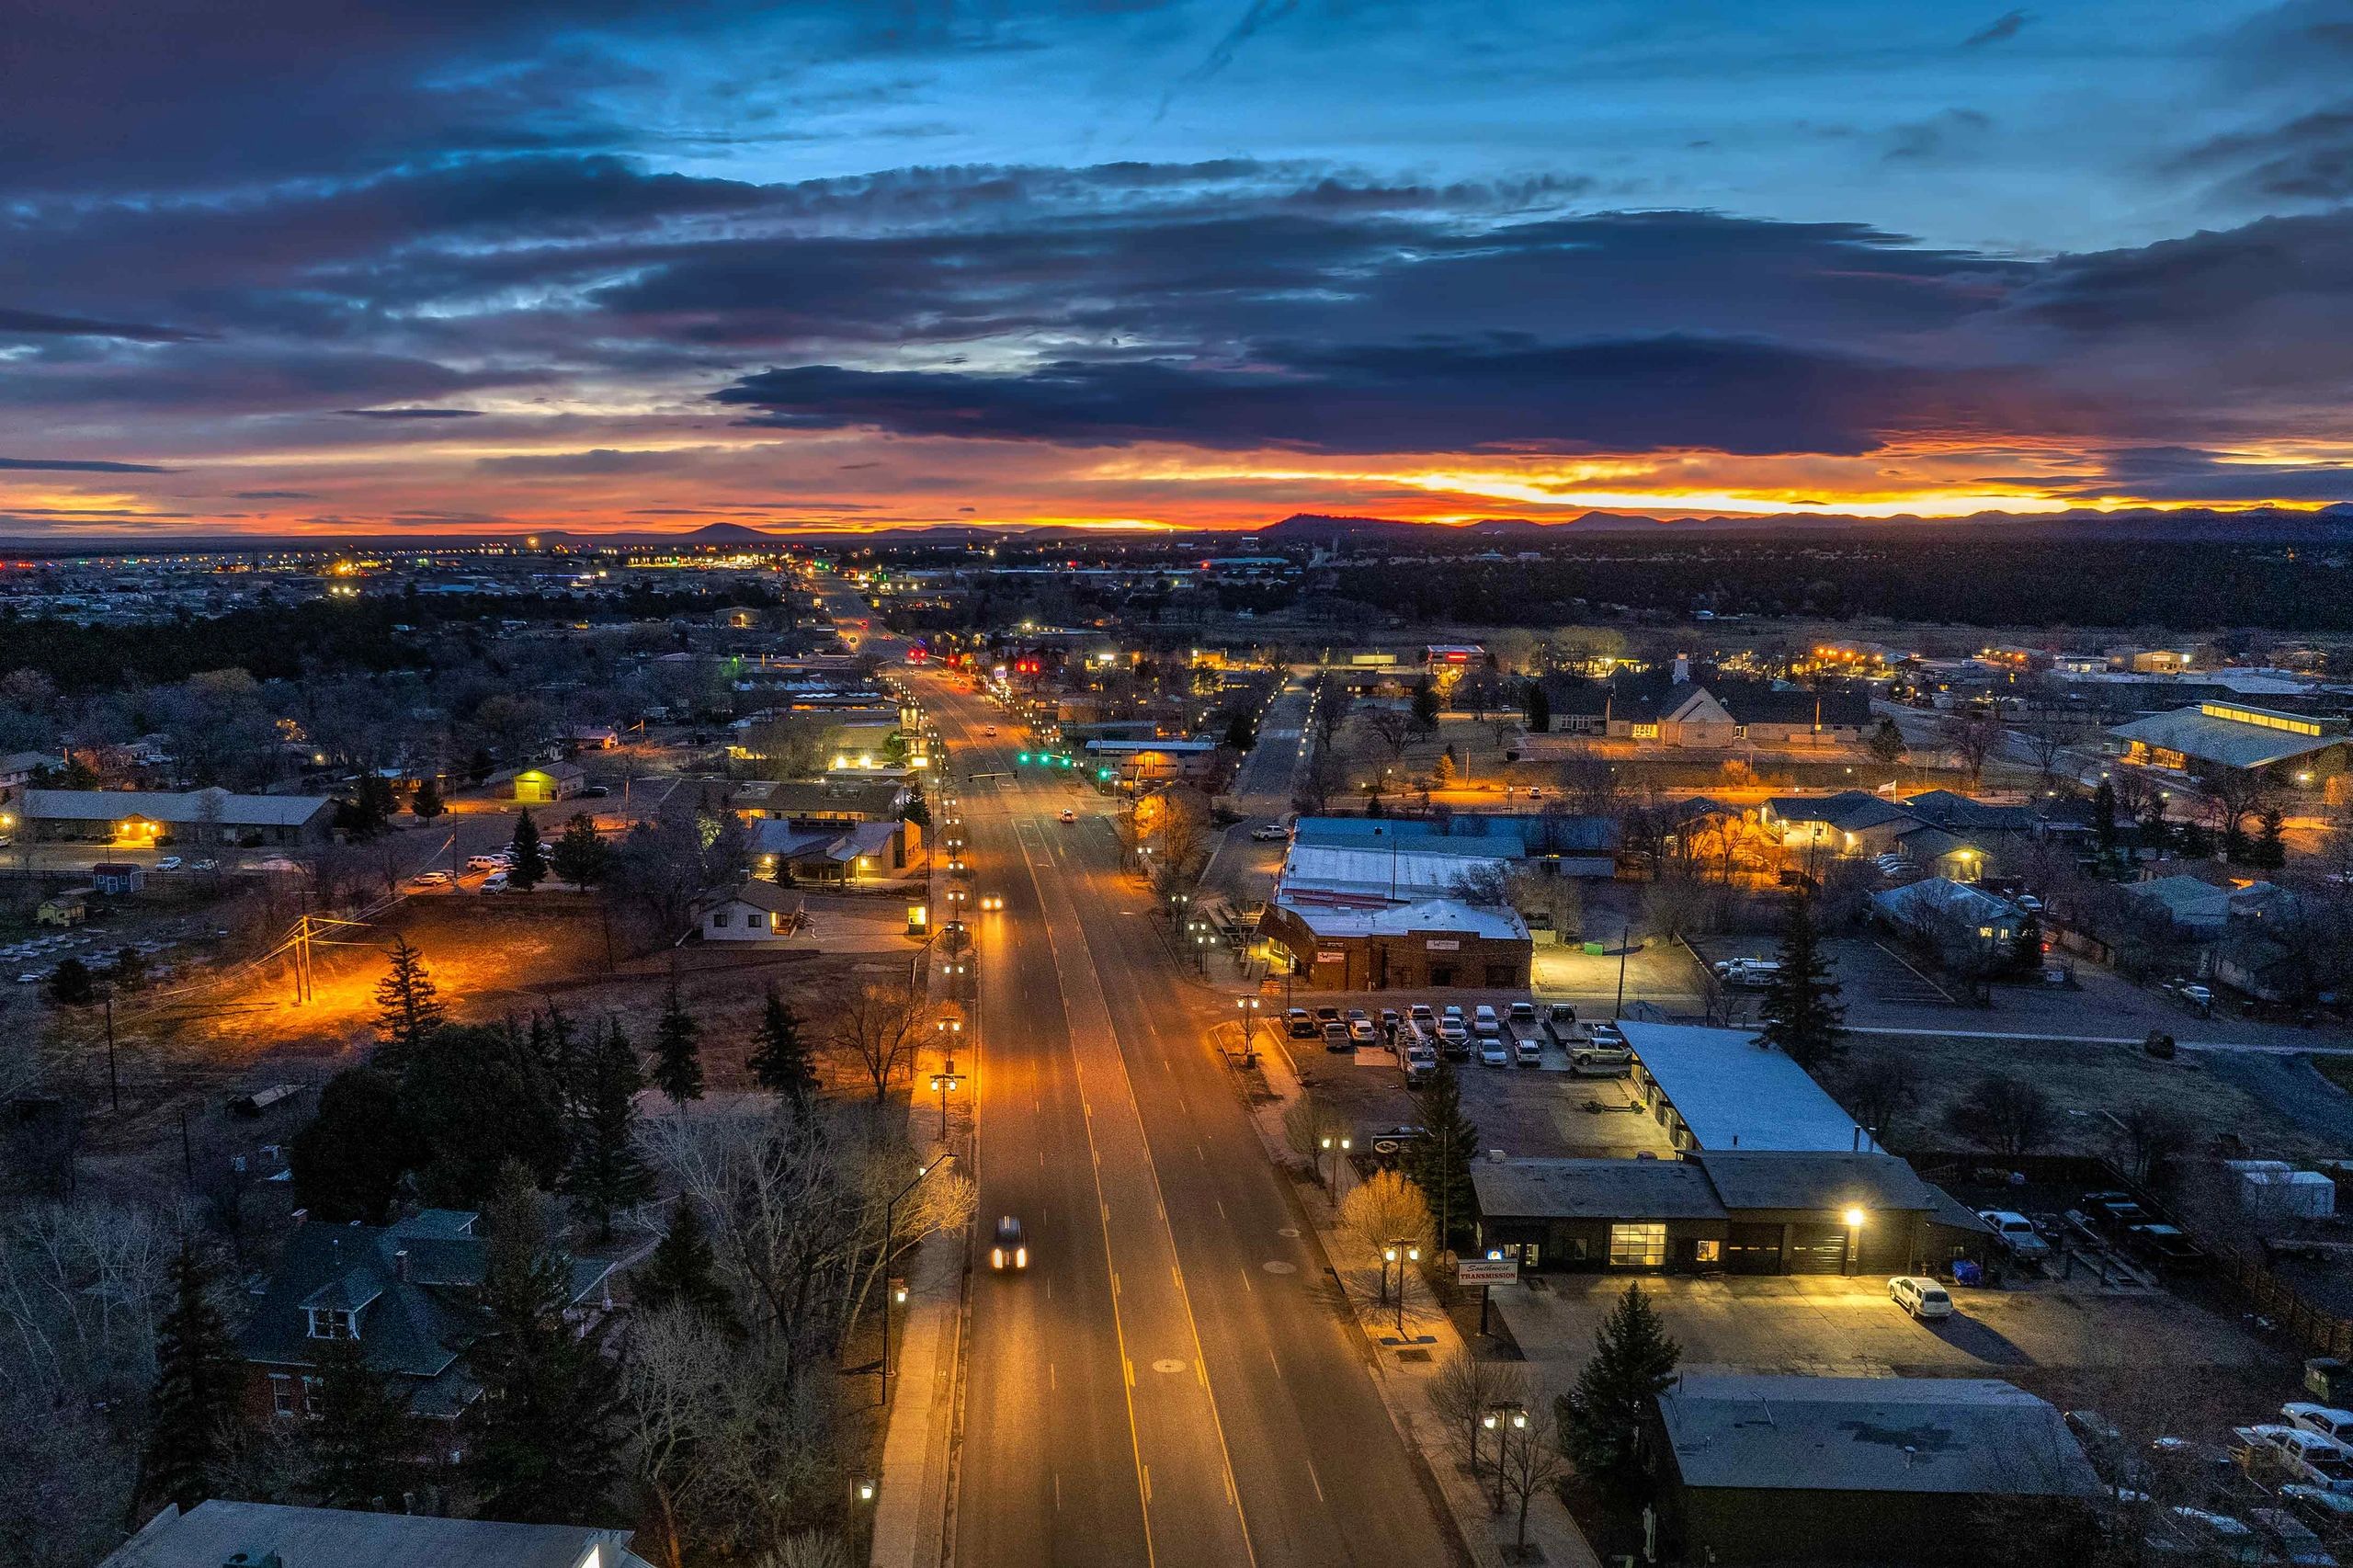 Early morning picture of Show Low, Arizona with a sunrise, city lights.
